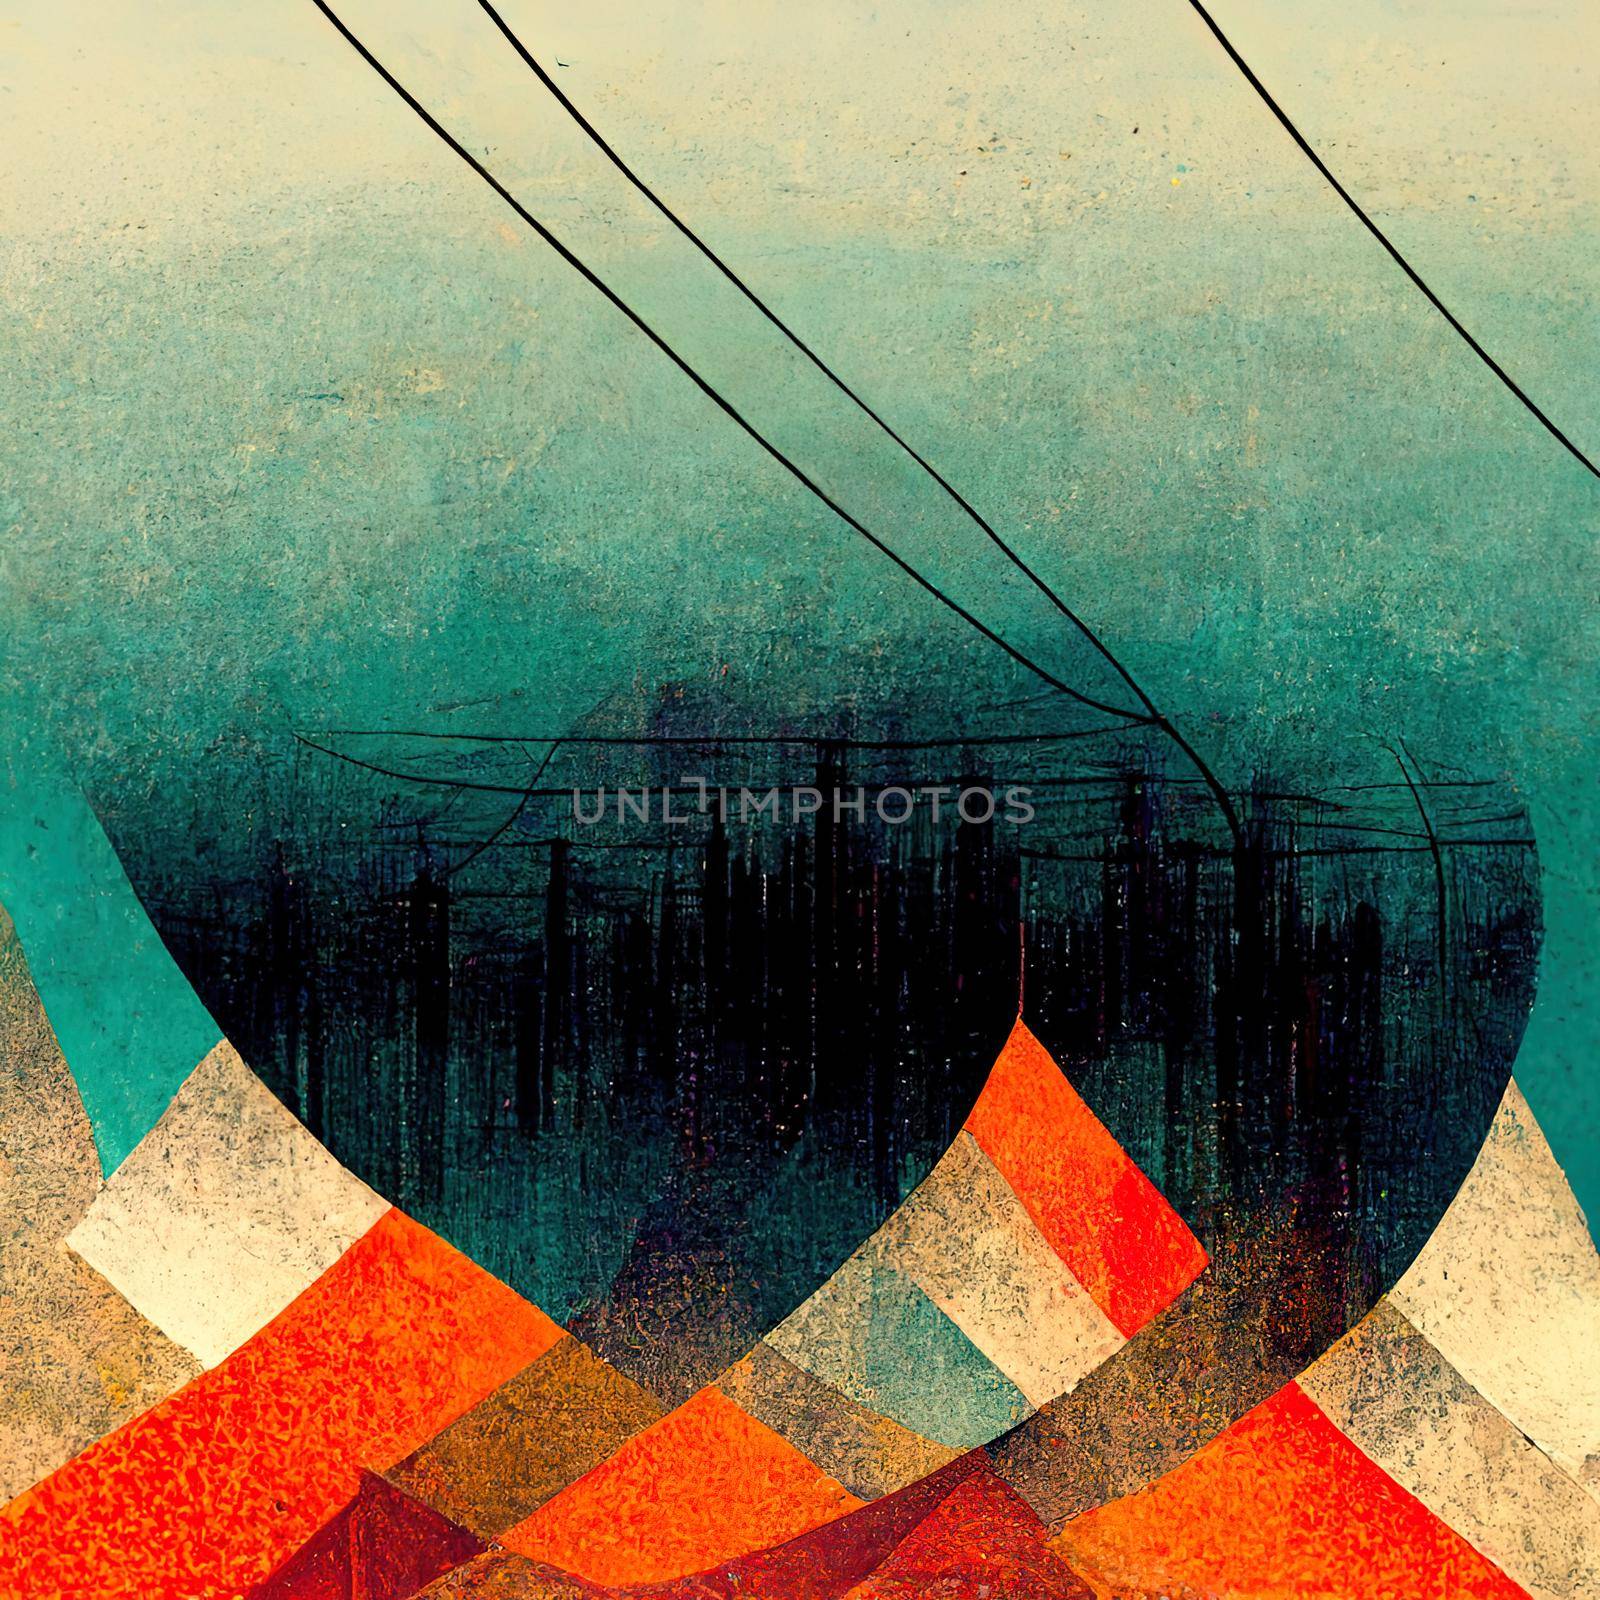 Metal wires, abstract illustration by 2ragon